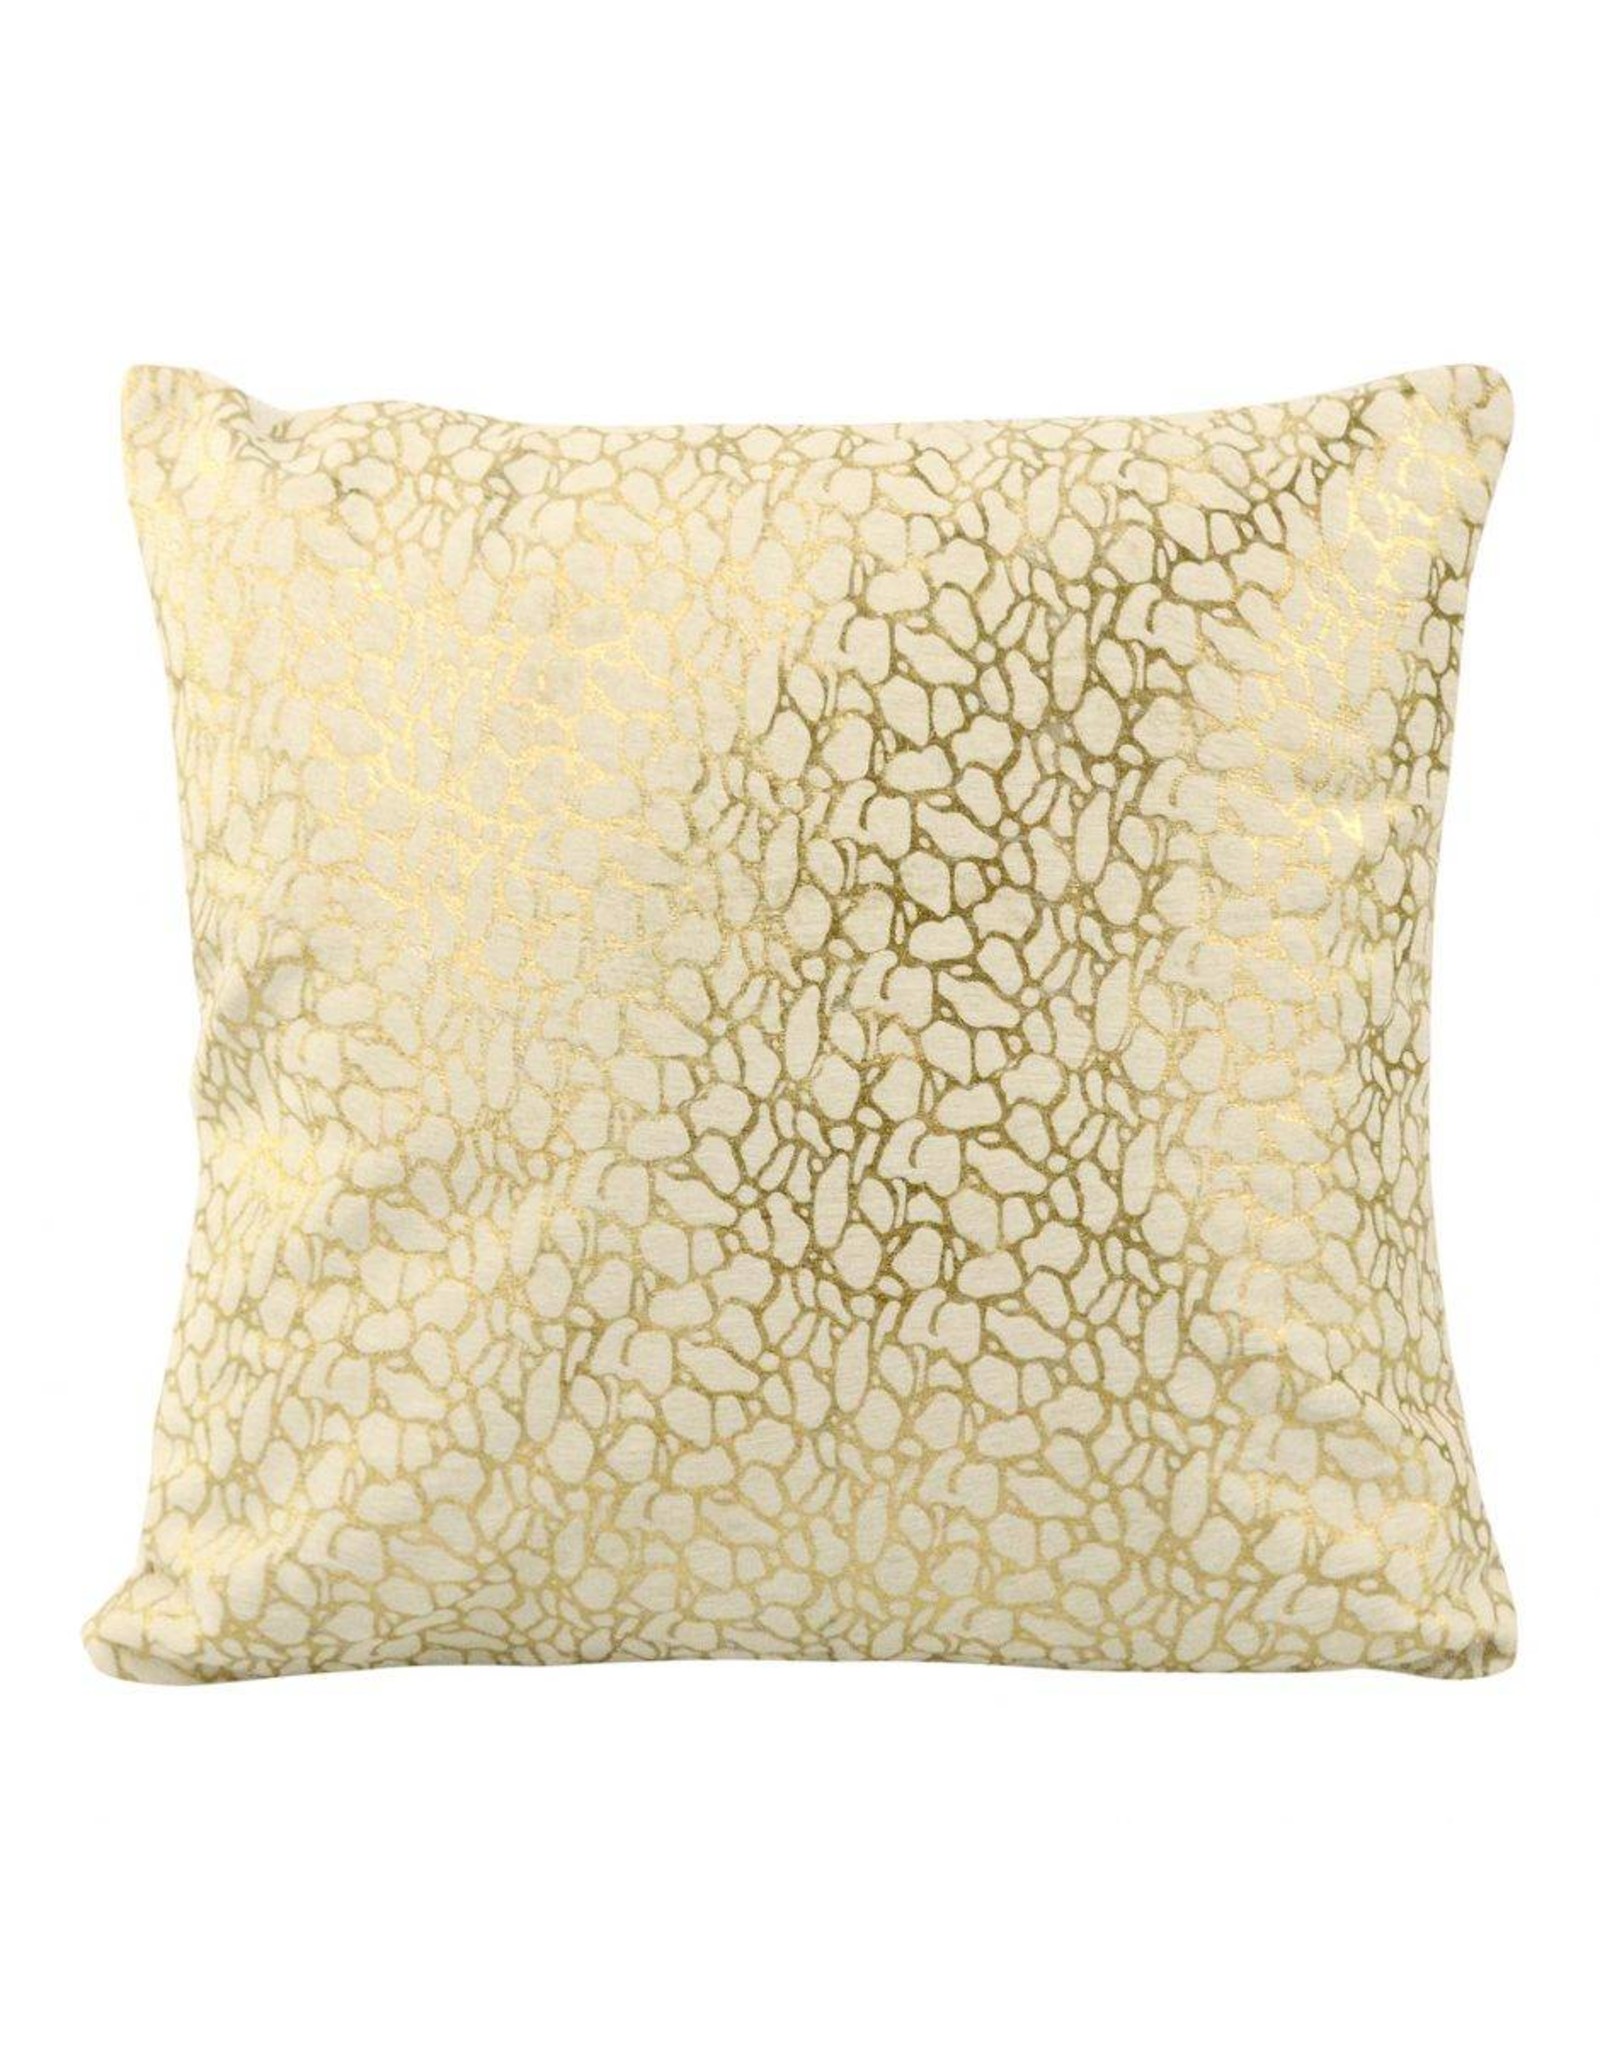 Monroe & Kent DAISY PILLOW WHITE AND GOLD